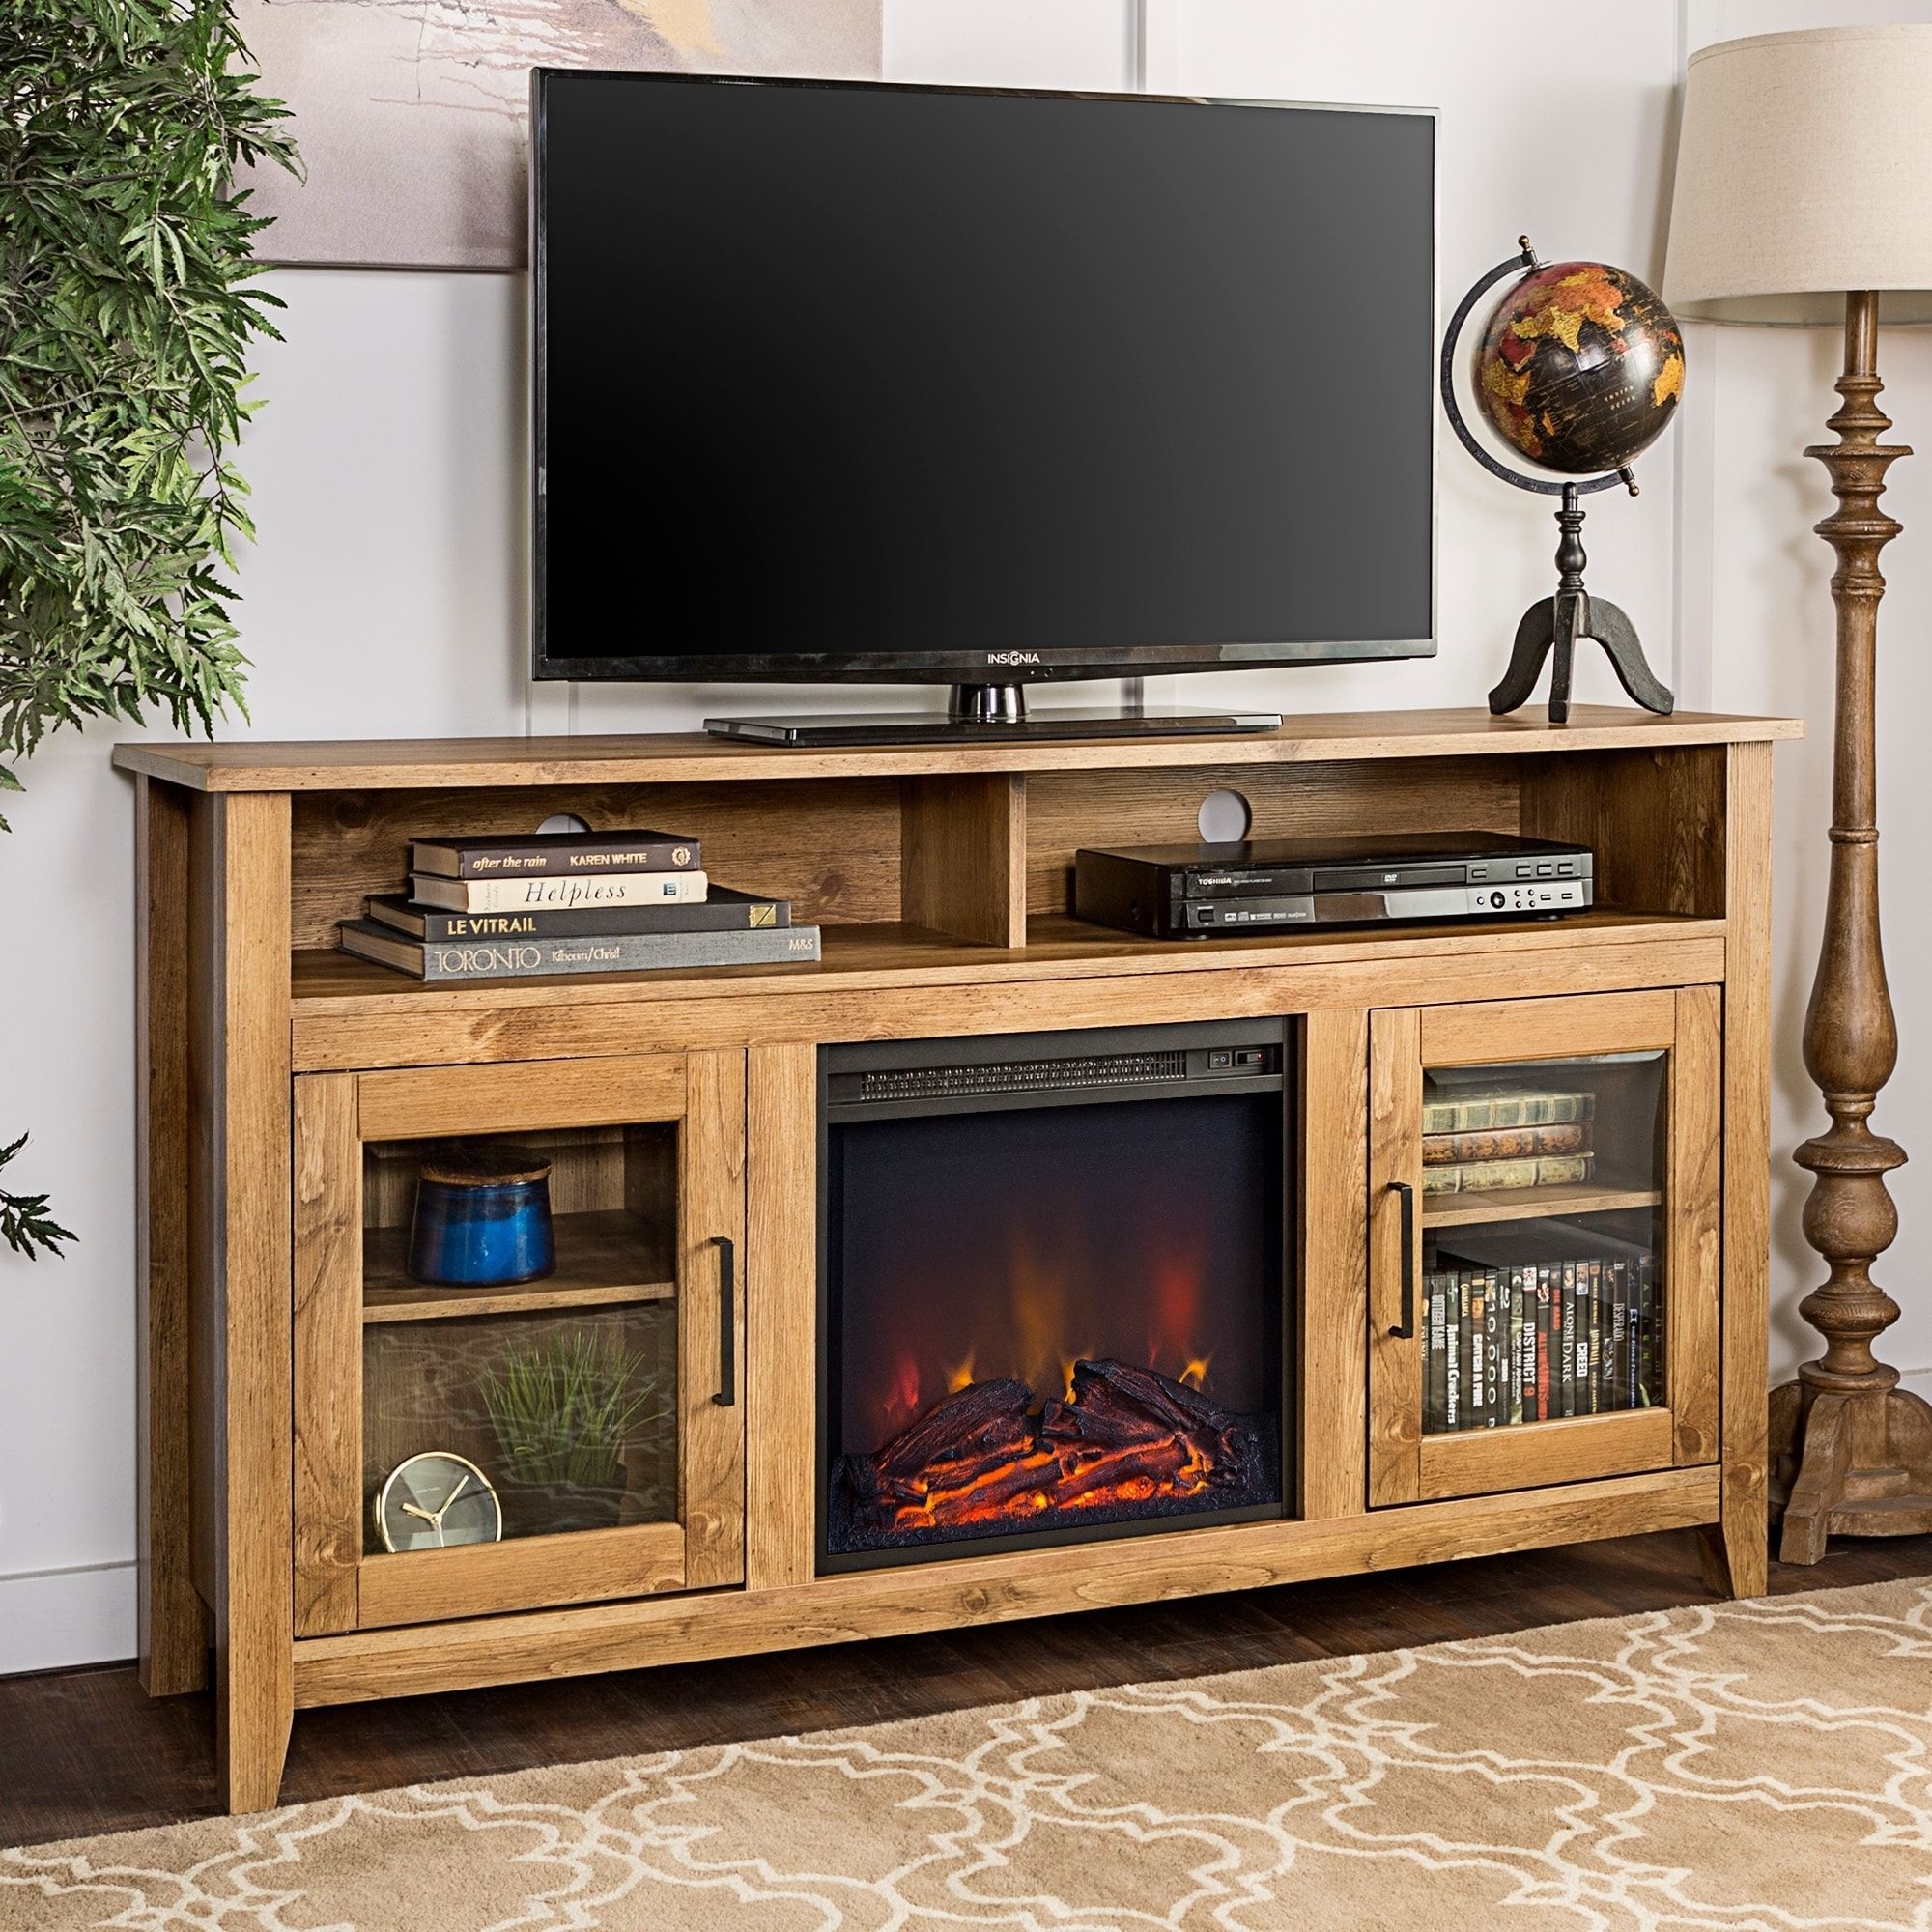 58 Inch Traditional Wood Highboy Tv Stand With Electric Fireplace Within Wood Highboy Fireplace Tv Stands (View 19 of 20)